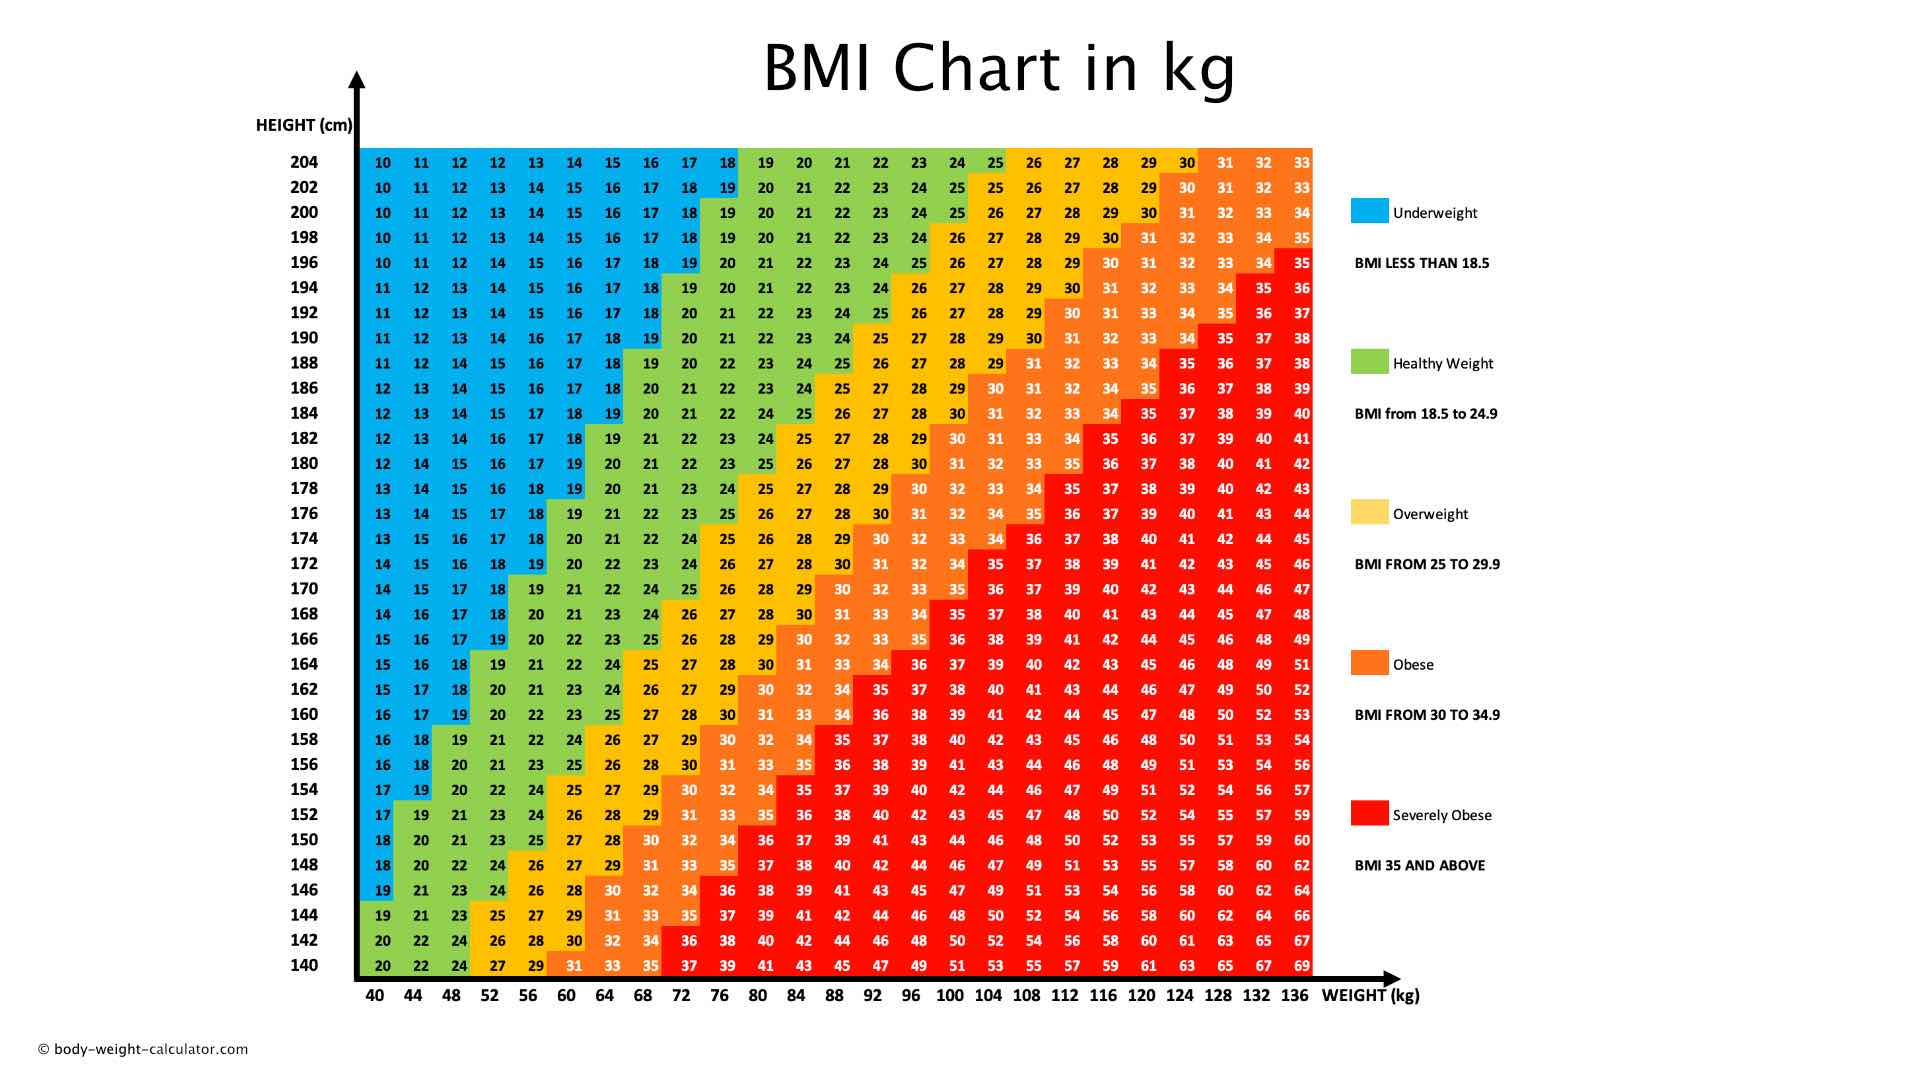 BMI chart by age in South Africa